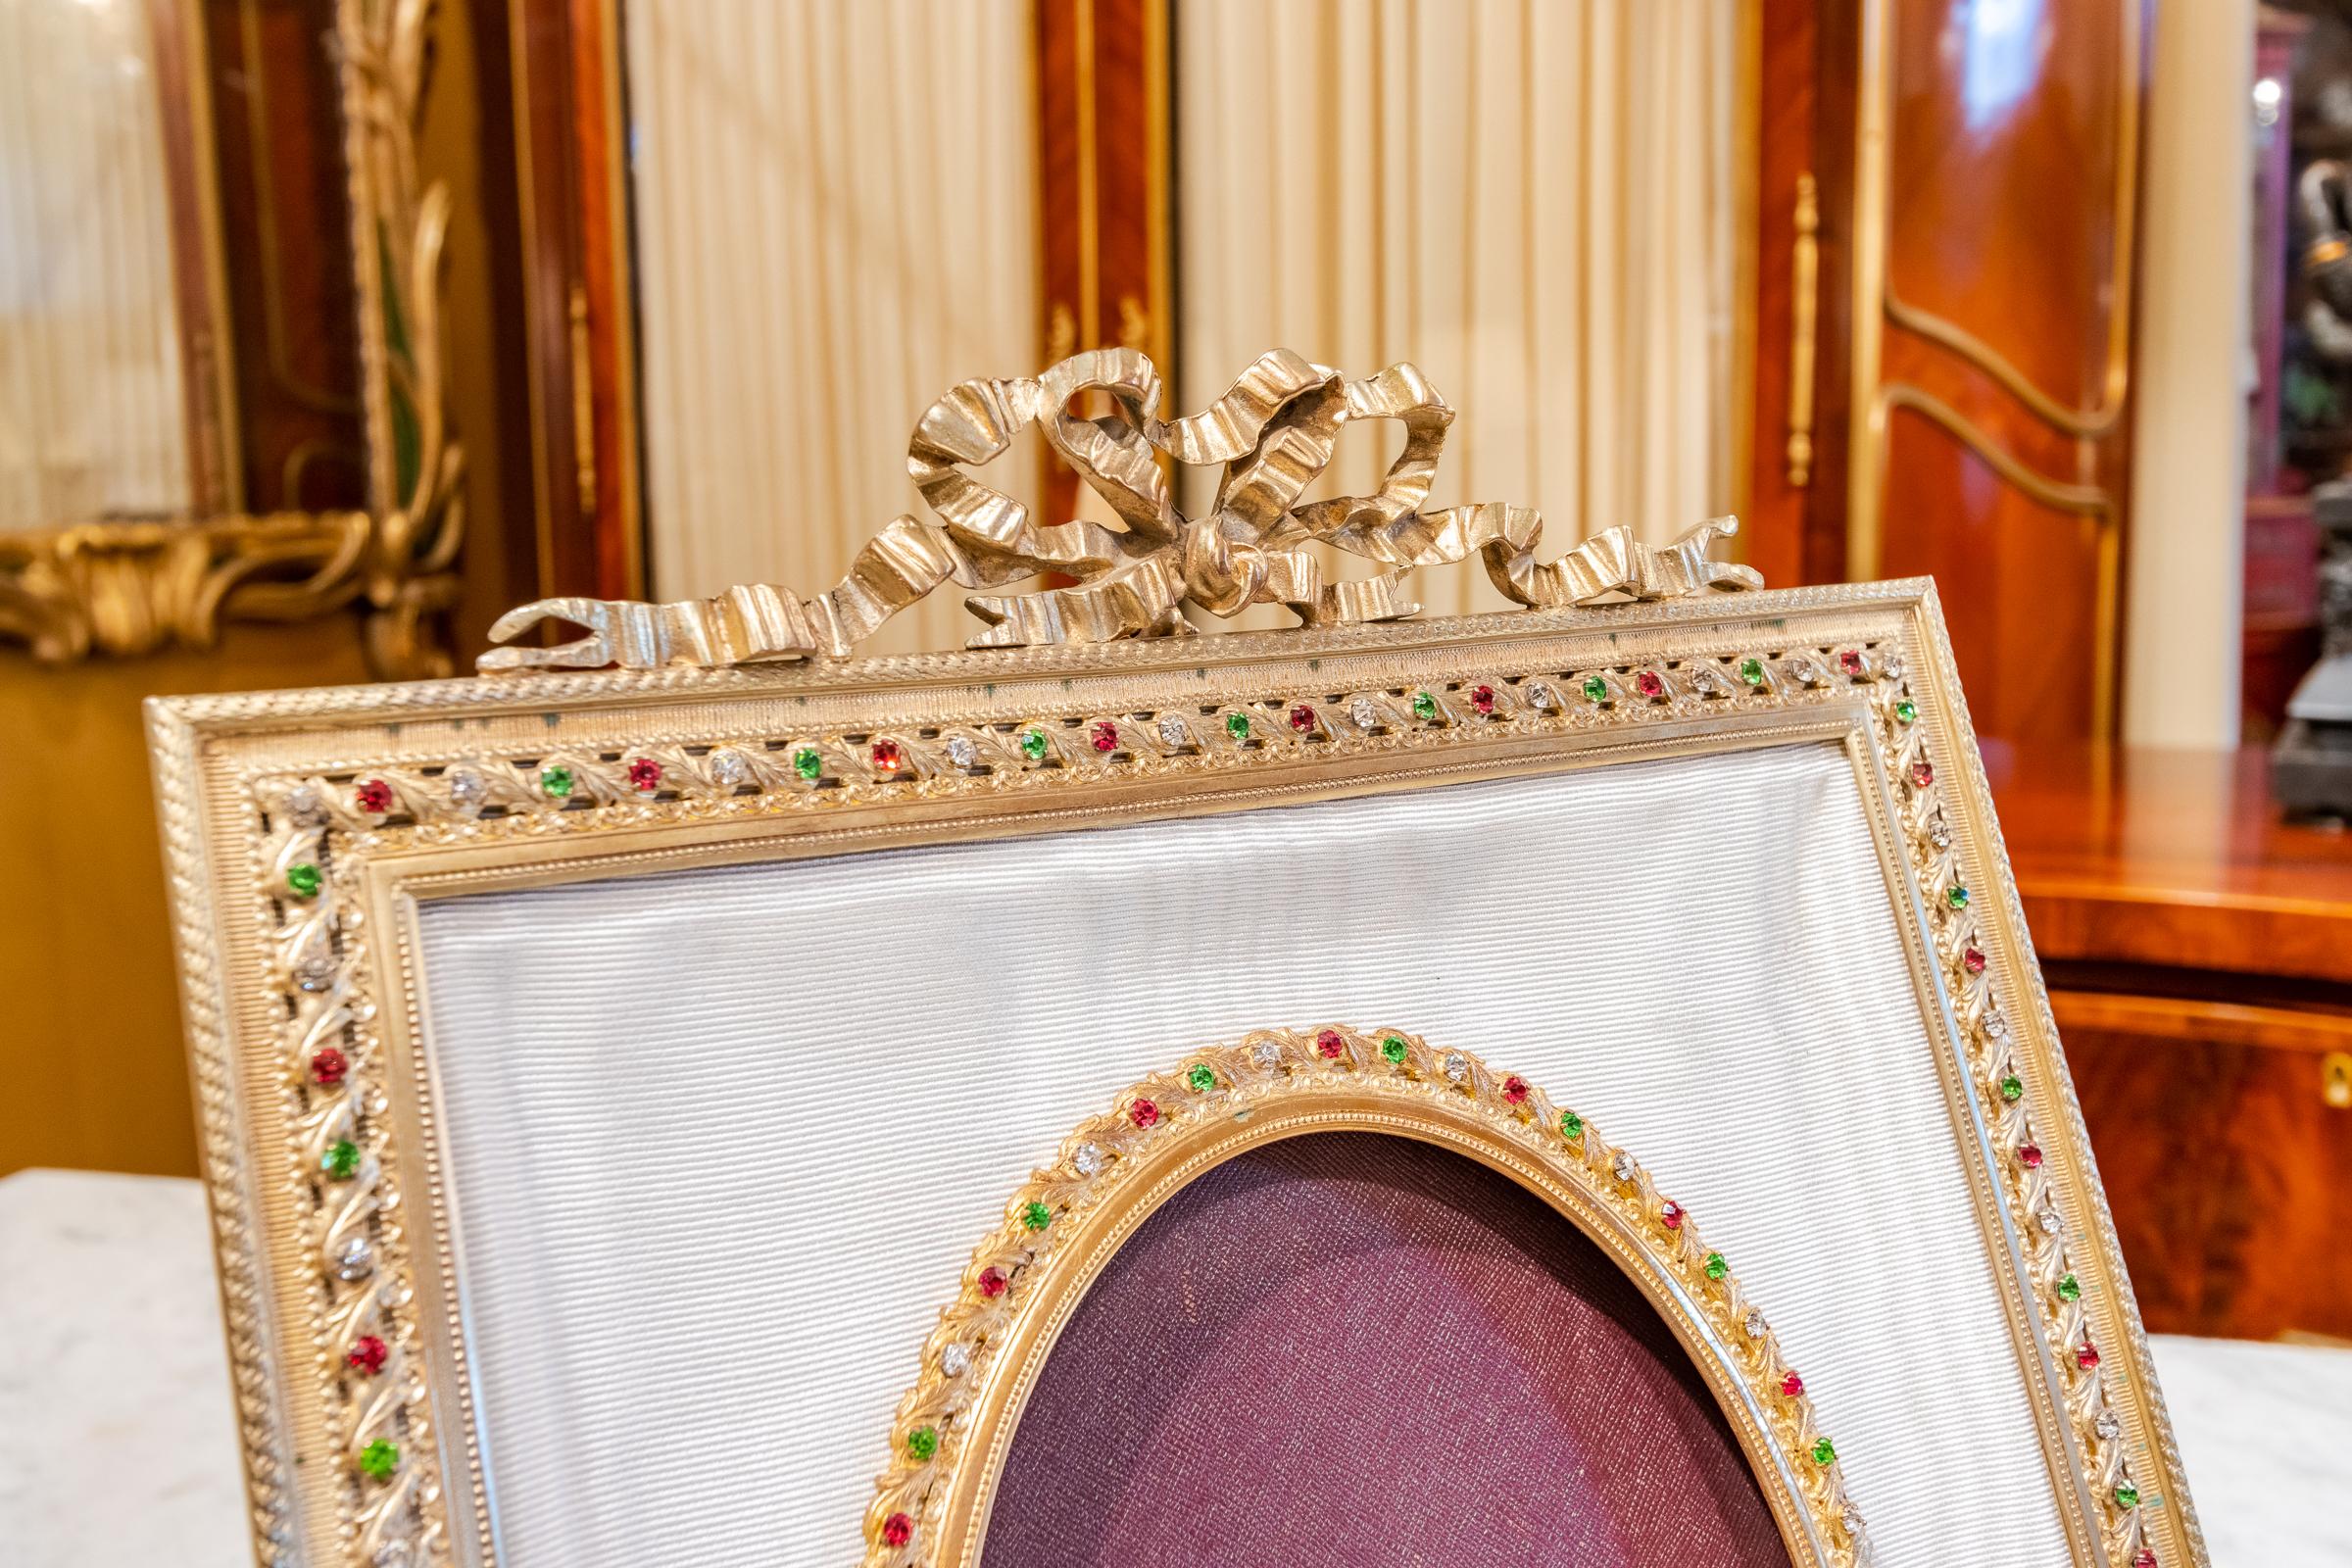 A fine 19th century French Louis XVI gilt bronze and jeweled frame.